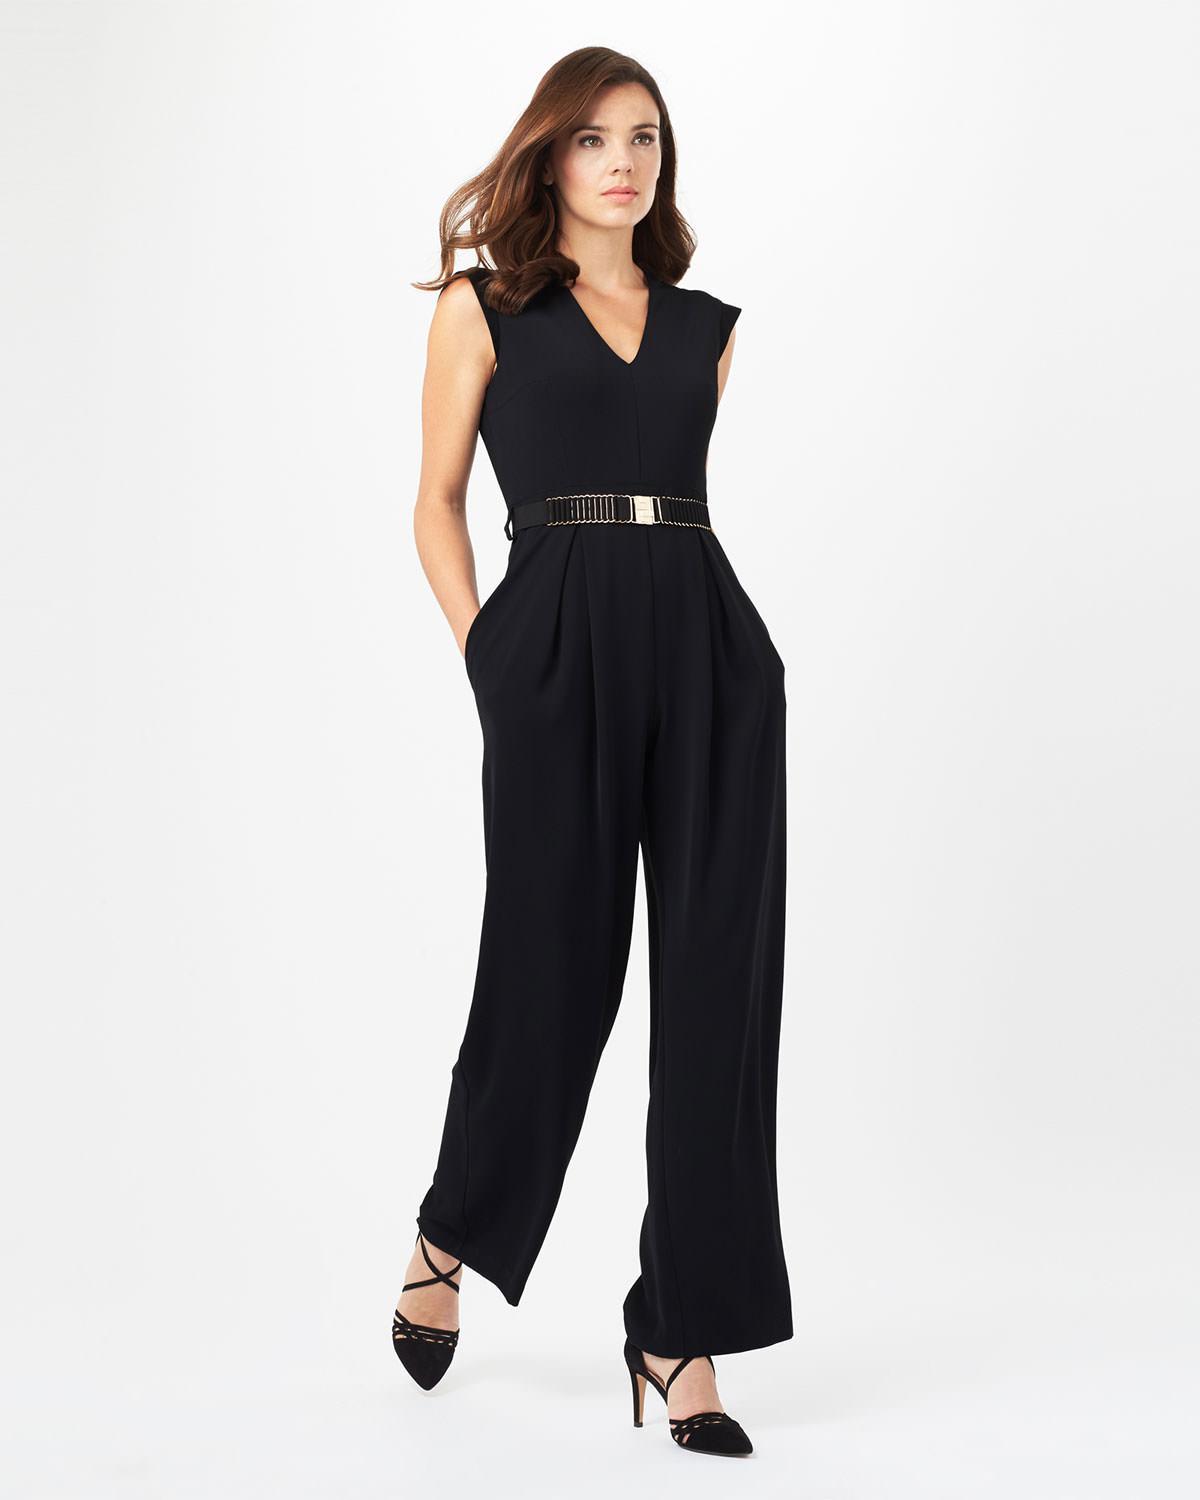 Phase Eight Synthetic Adelaide Belted Jumpsuit in Black - Lyst